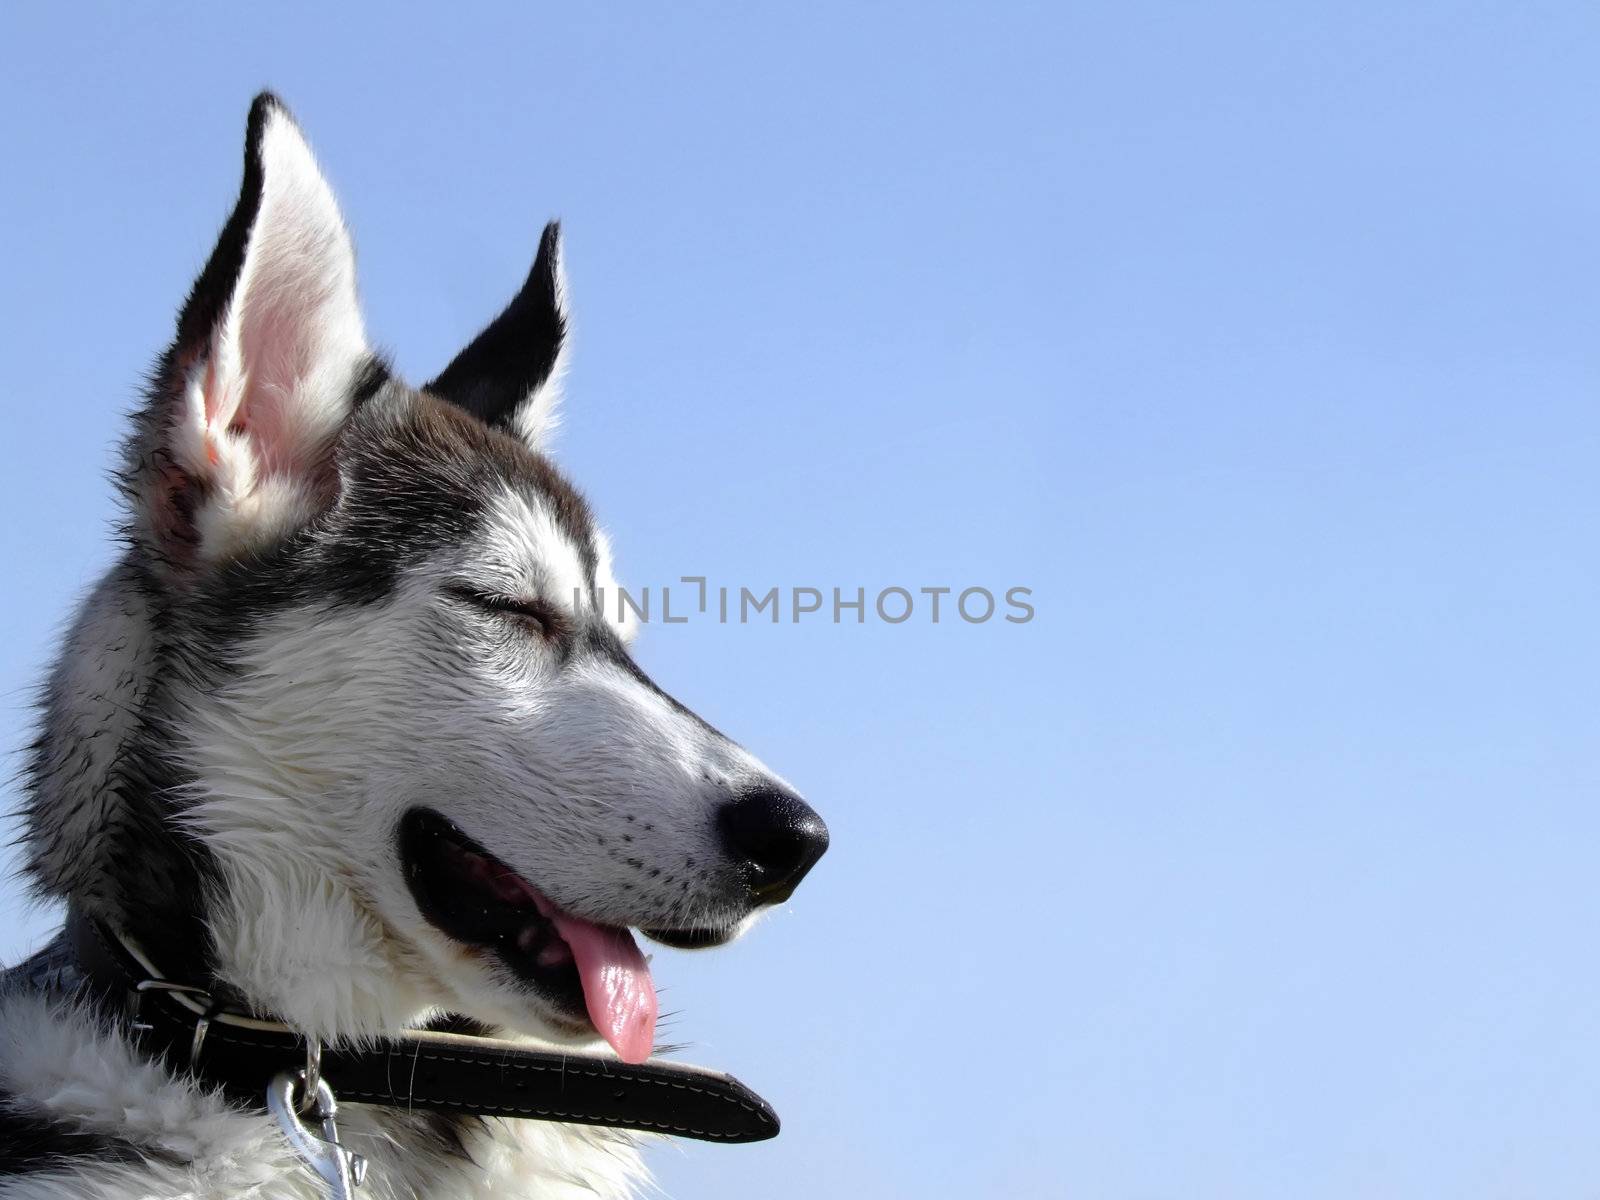 Canine series - imagery depicting different breeds of our canine companions - Siberian Husky